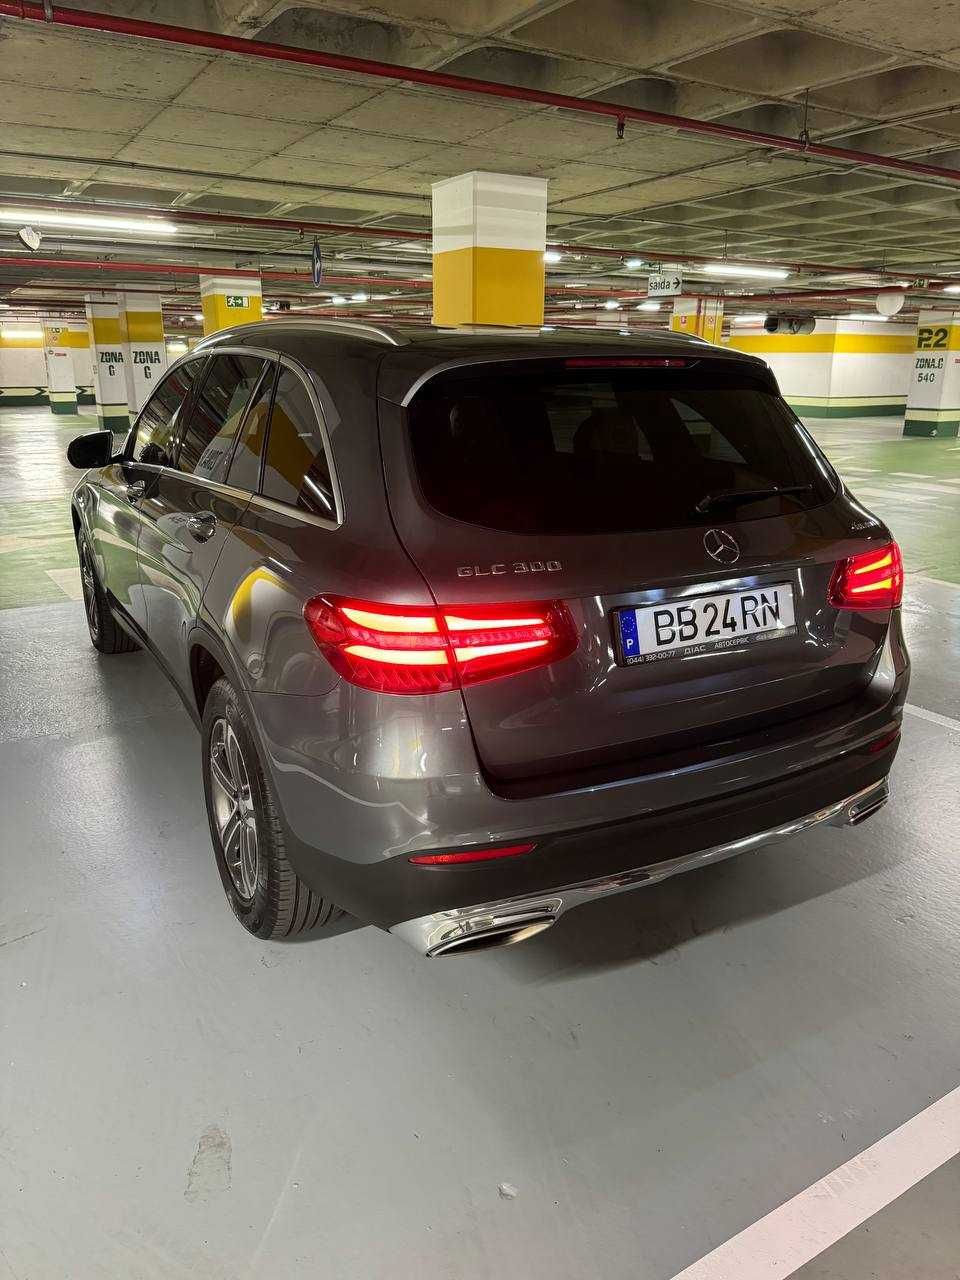 Mercedes-Benz GLC 300 4Matic 9G-TRONIC Exclusive